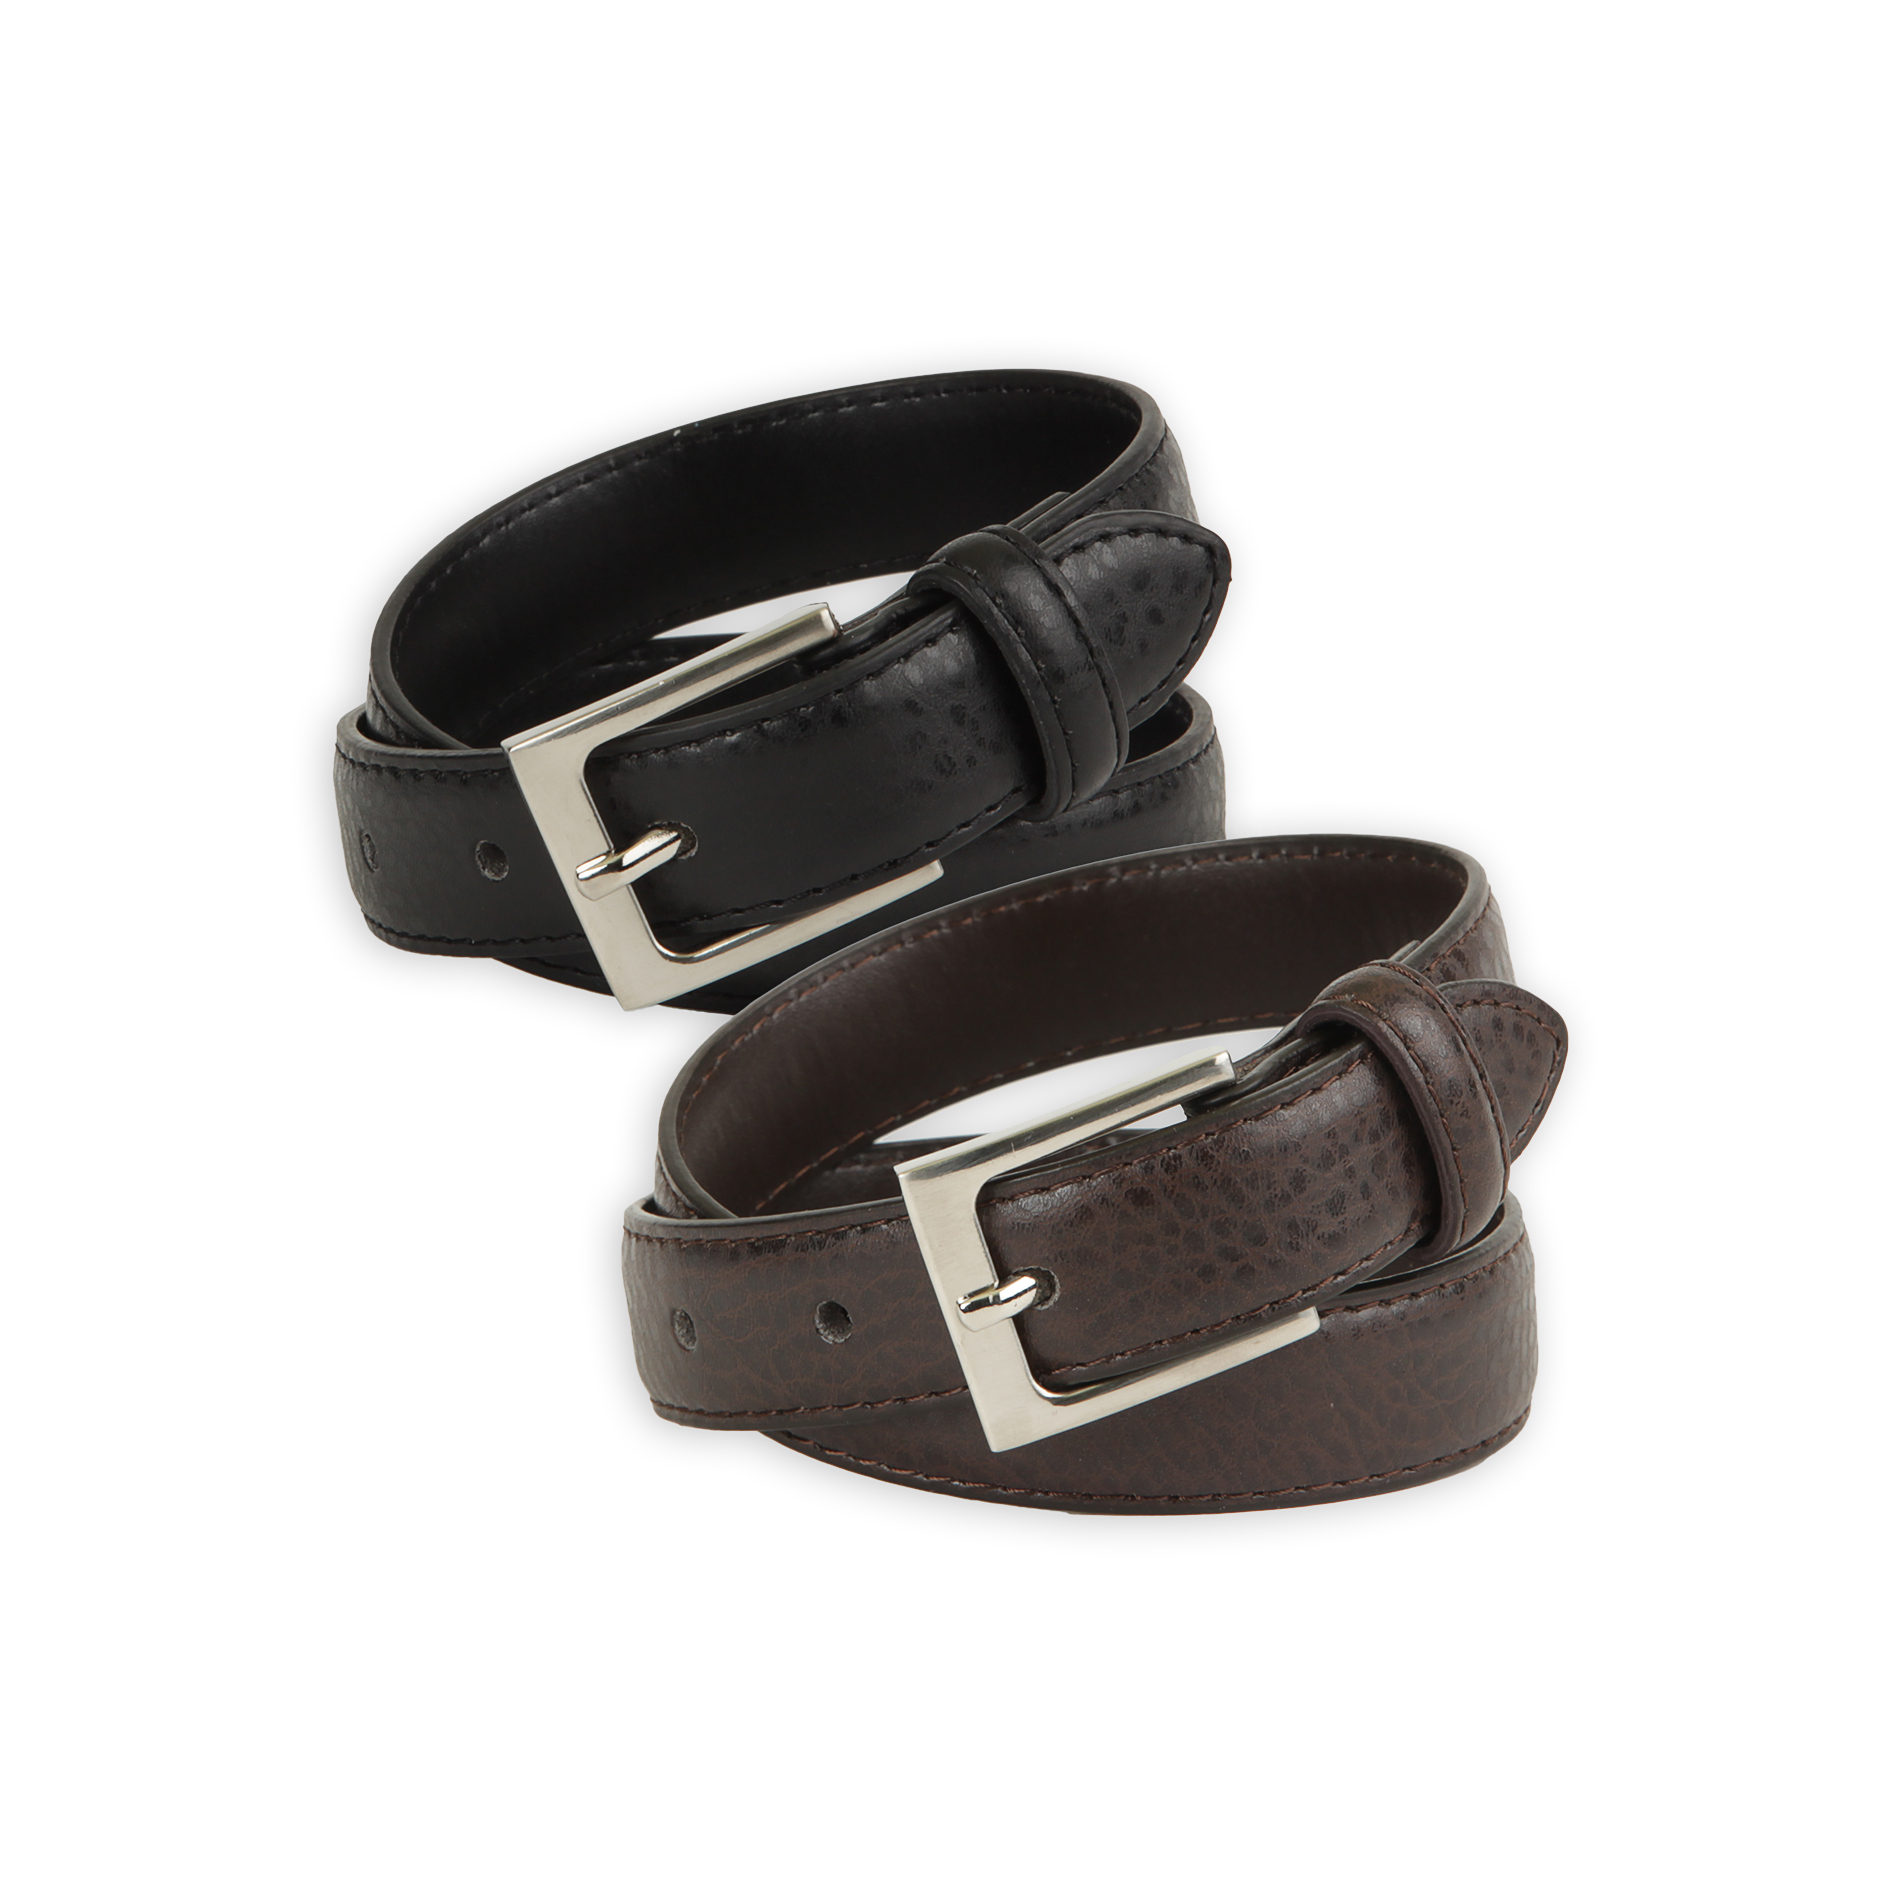 Basic Editions Boy's 2-Pack Leather Belts